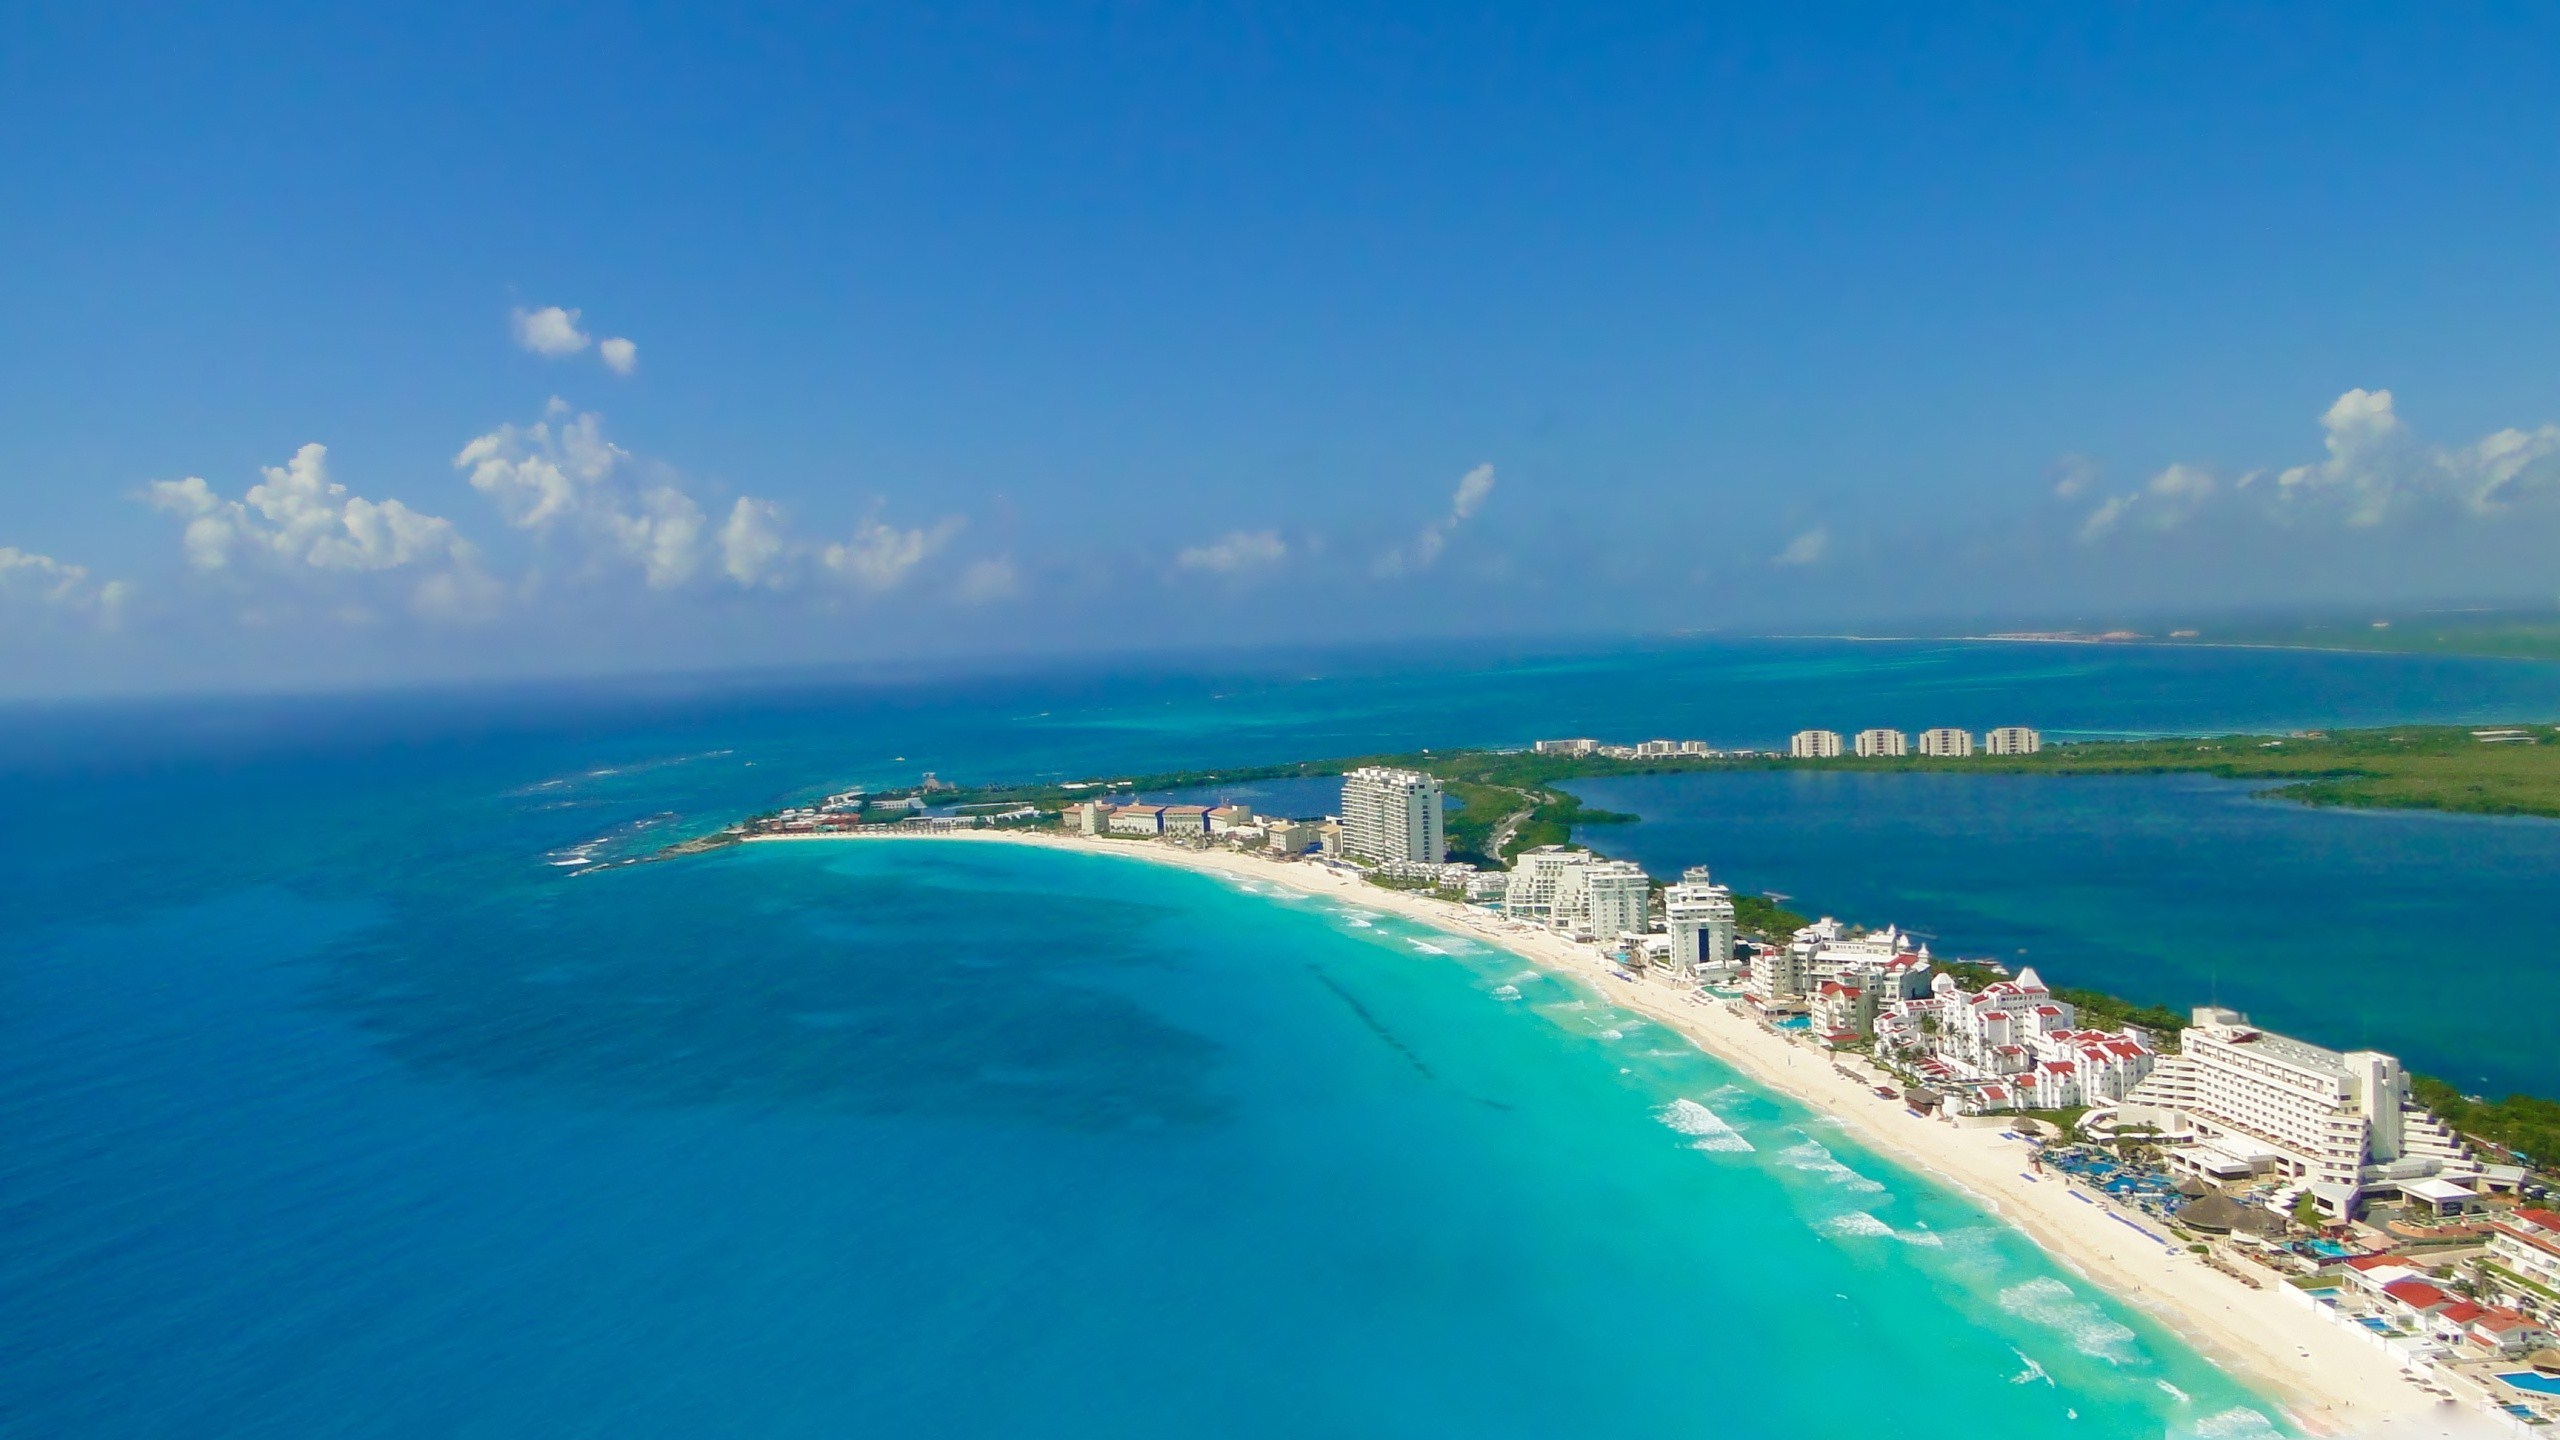 Cancún on the Yucatán Peninsula is a beachfront strip of high-rise hotels, nightclubs and resorts